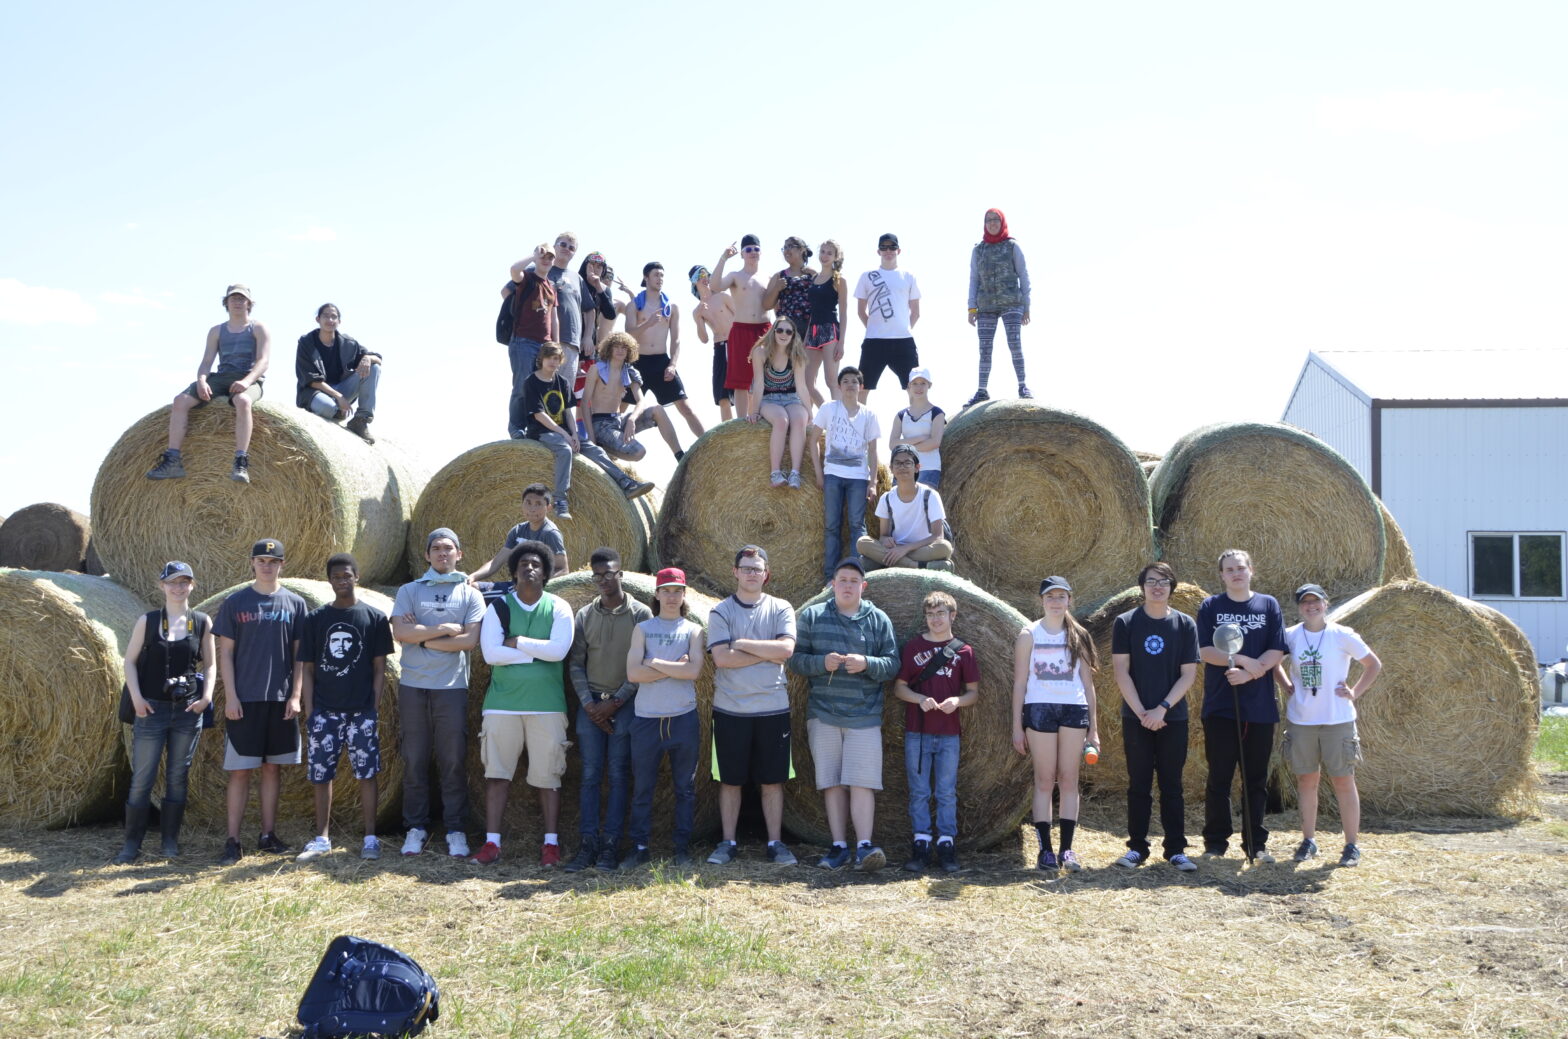 Group photo of youth at a ranch